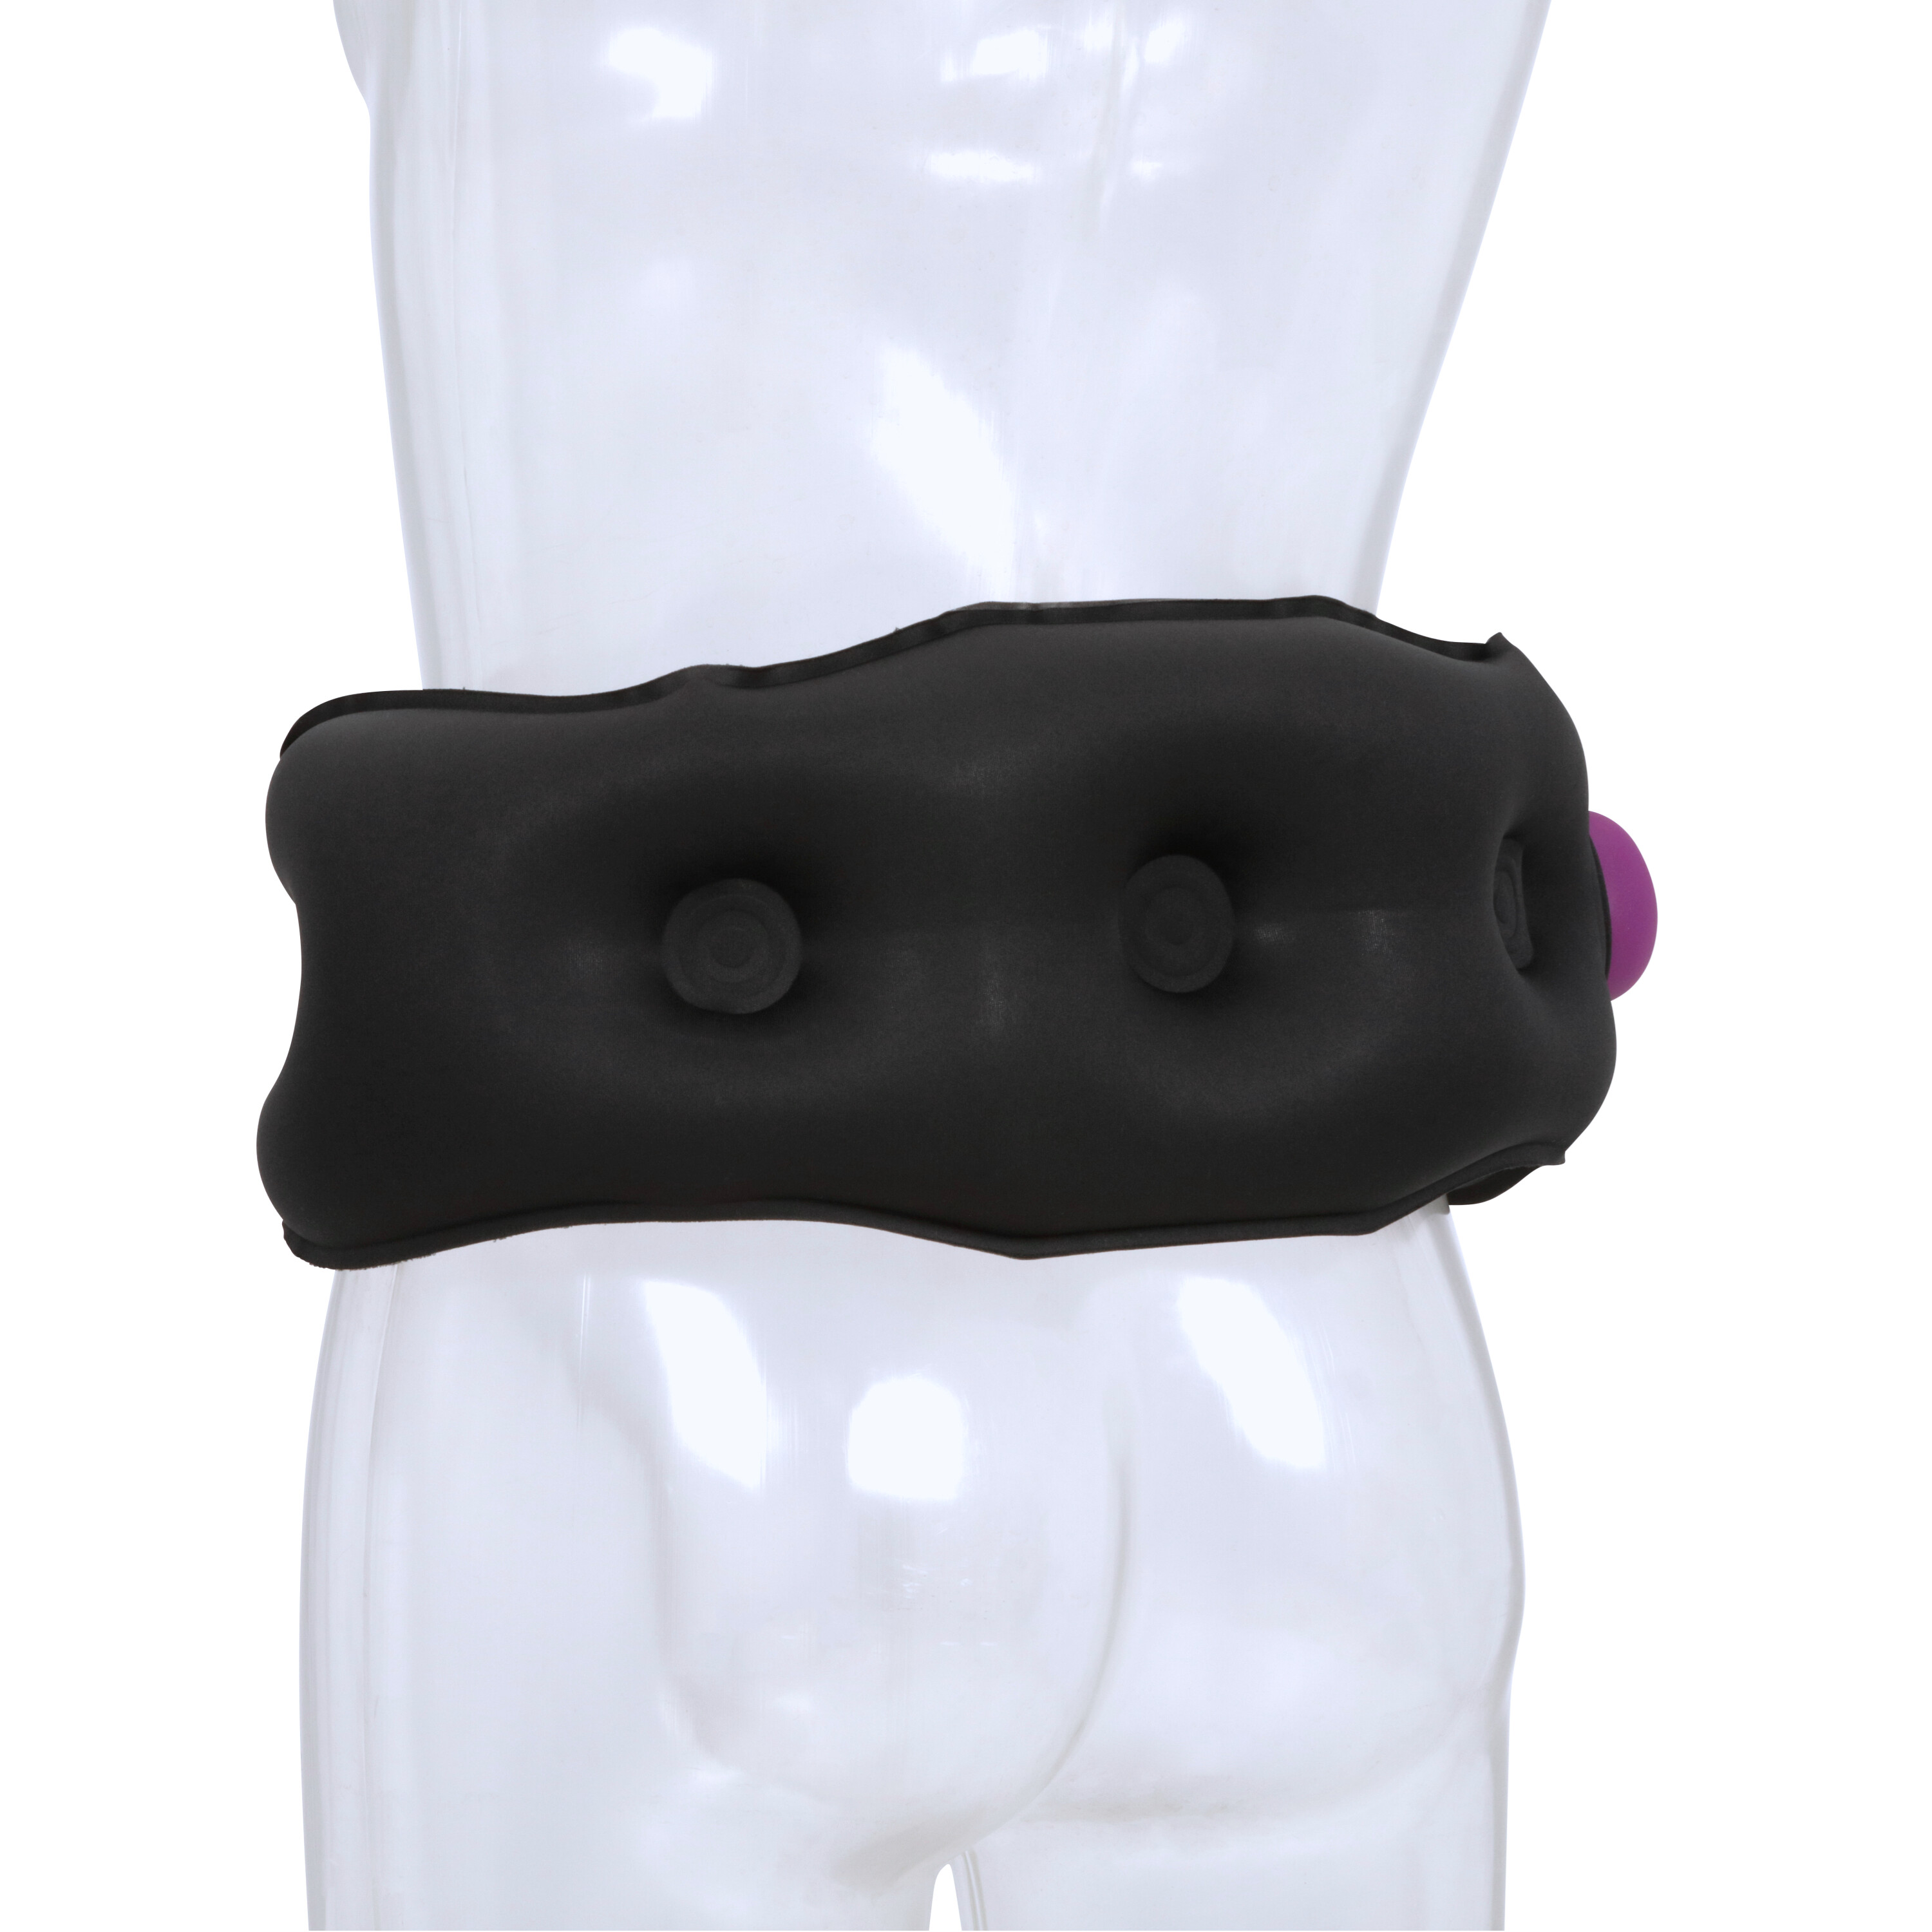 Cabeau Incredi-belt Inflatable Lumbar Support Belt For Back Pain